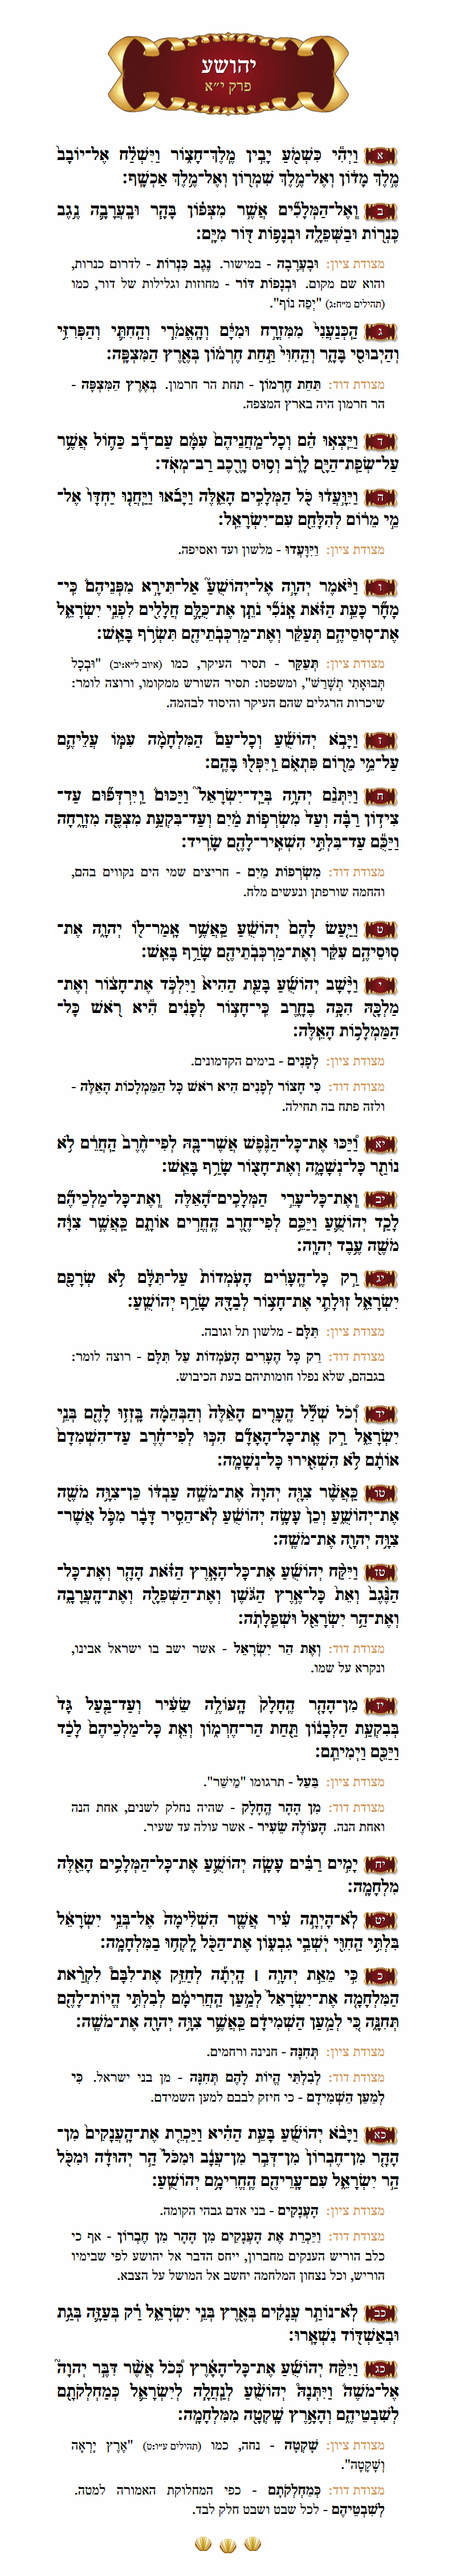 Sefer Yehoshua Chapter 11 with commentary